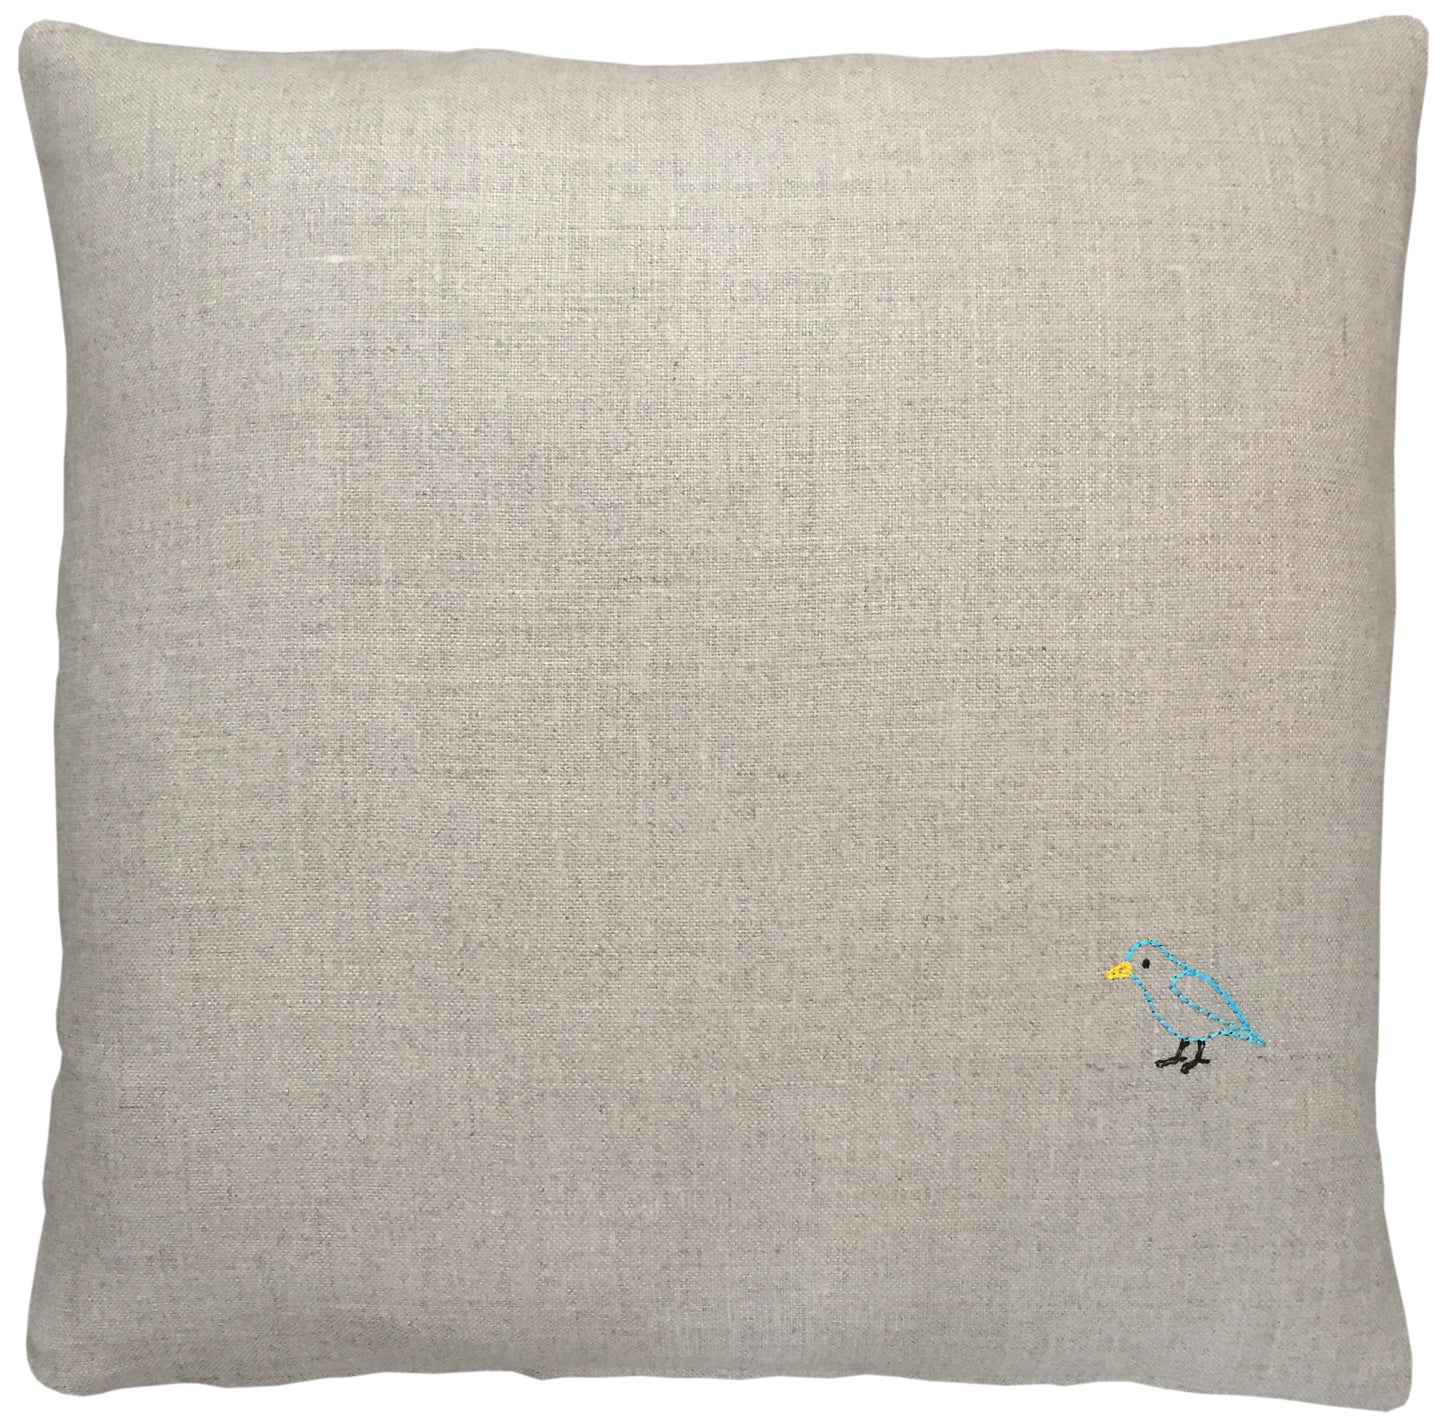 Tiny Objects Pillow